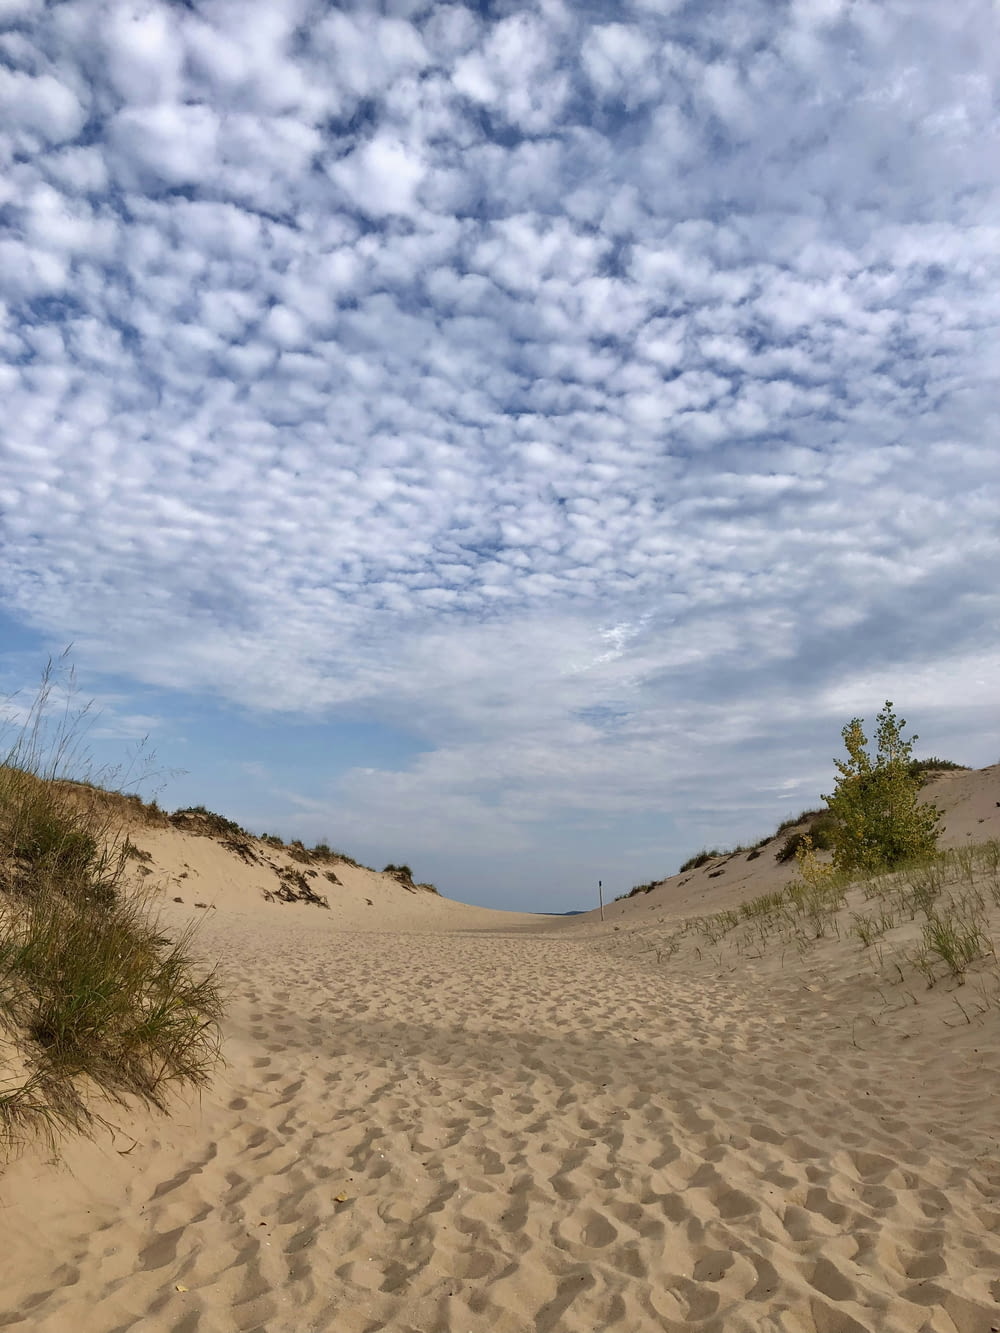 a sandy path leading to the ocean under a cloudy sky